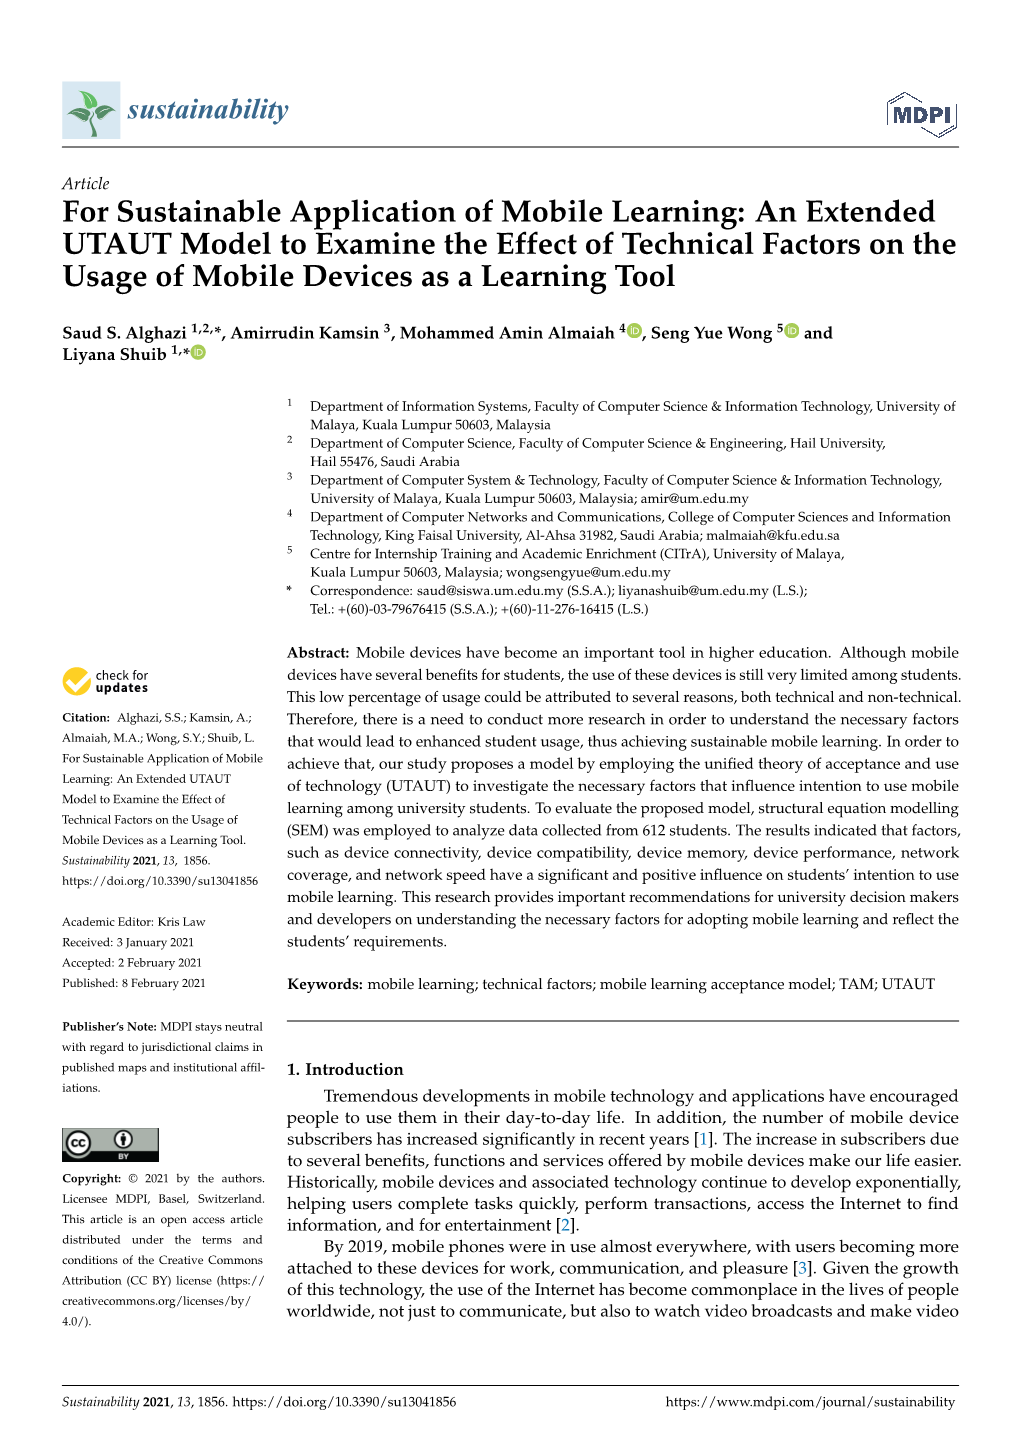 For Sustainable Application of Mobile Learning: an Extended UTAUT Model to Examine the Effect of Technical Factors on the Usage of Mobile Devices As a Learning Tool